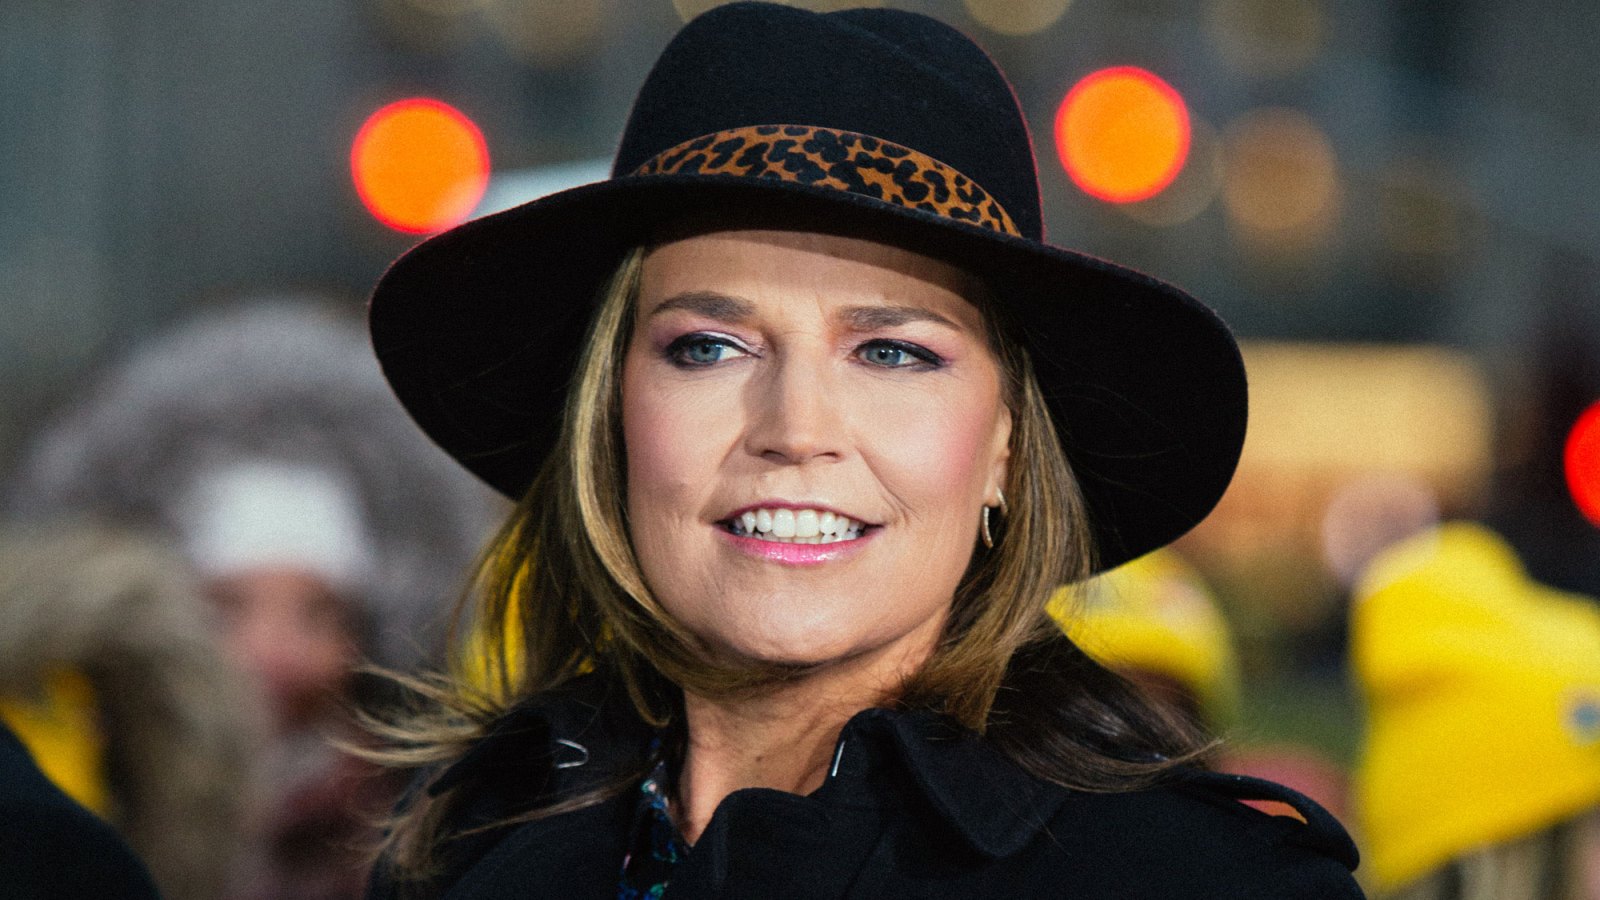 Savannah Guthrie’s Temporarily Loses Vision After Son, 2, Throws Toy Train at Her Eye